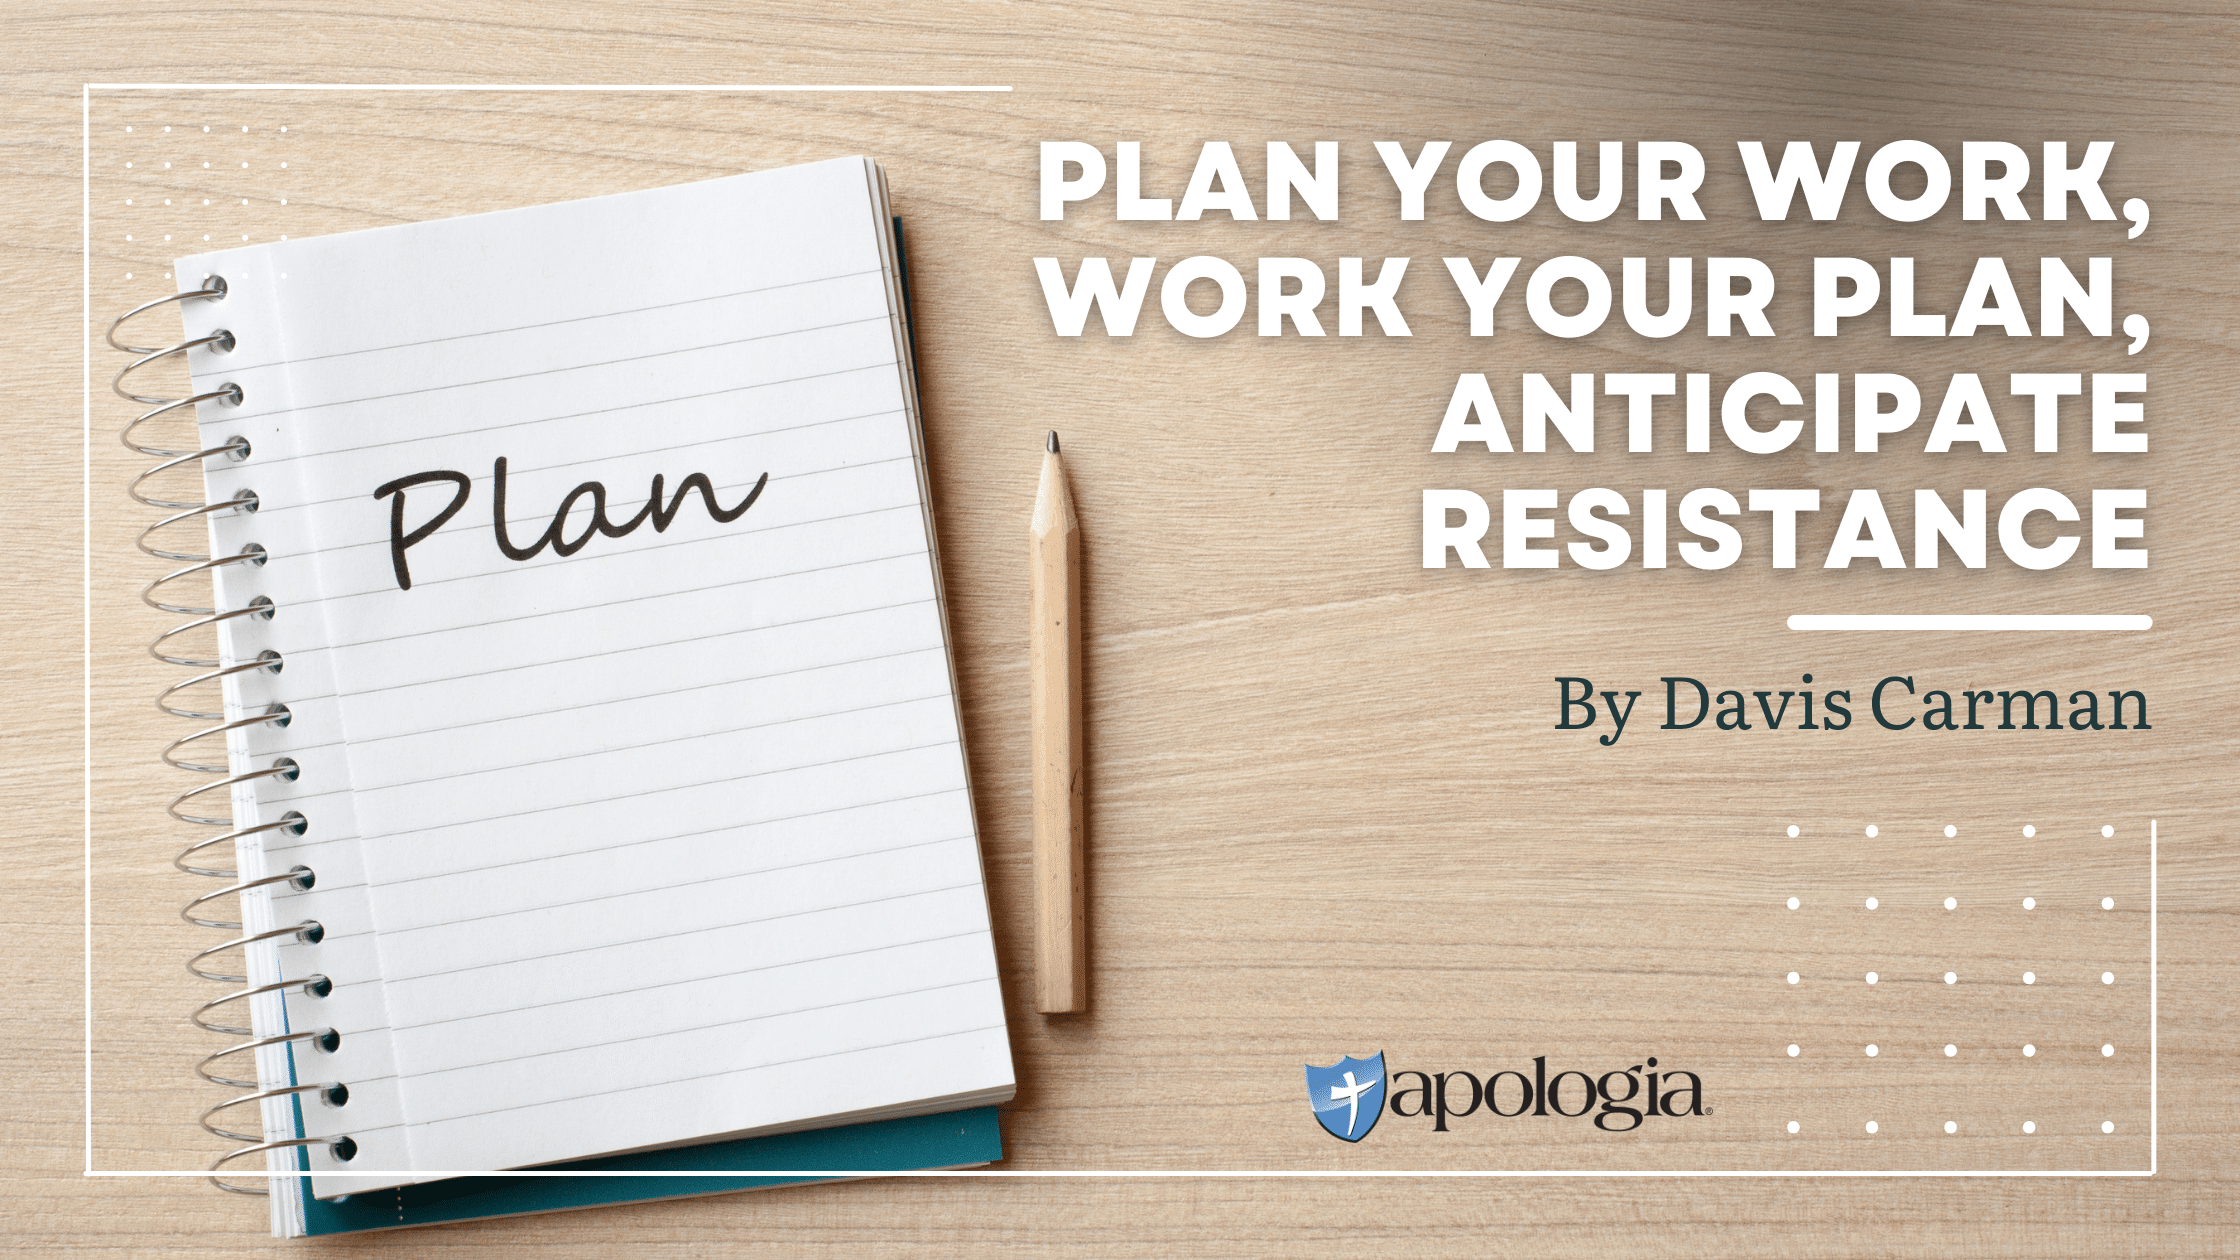 Plan Your Work, Work Your Plan, Anticipate Resistance